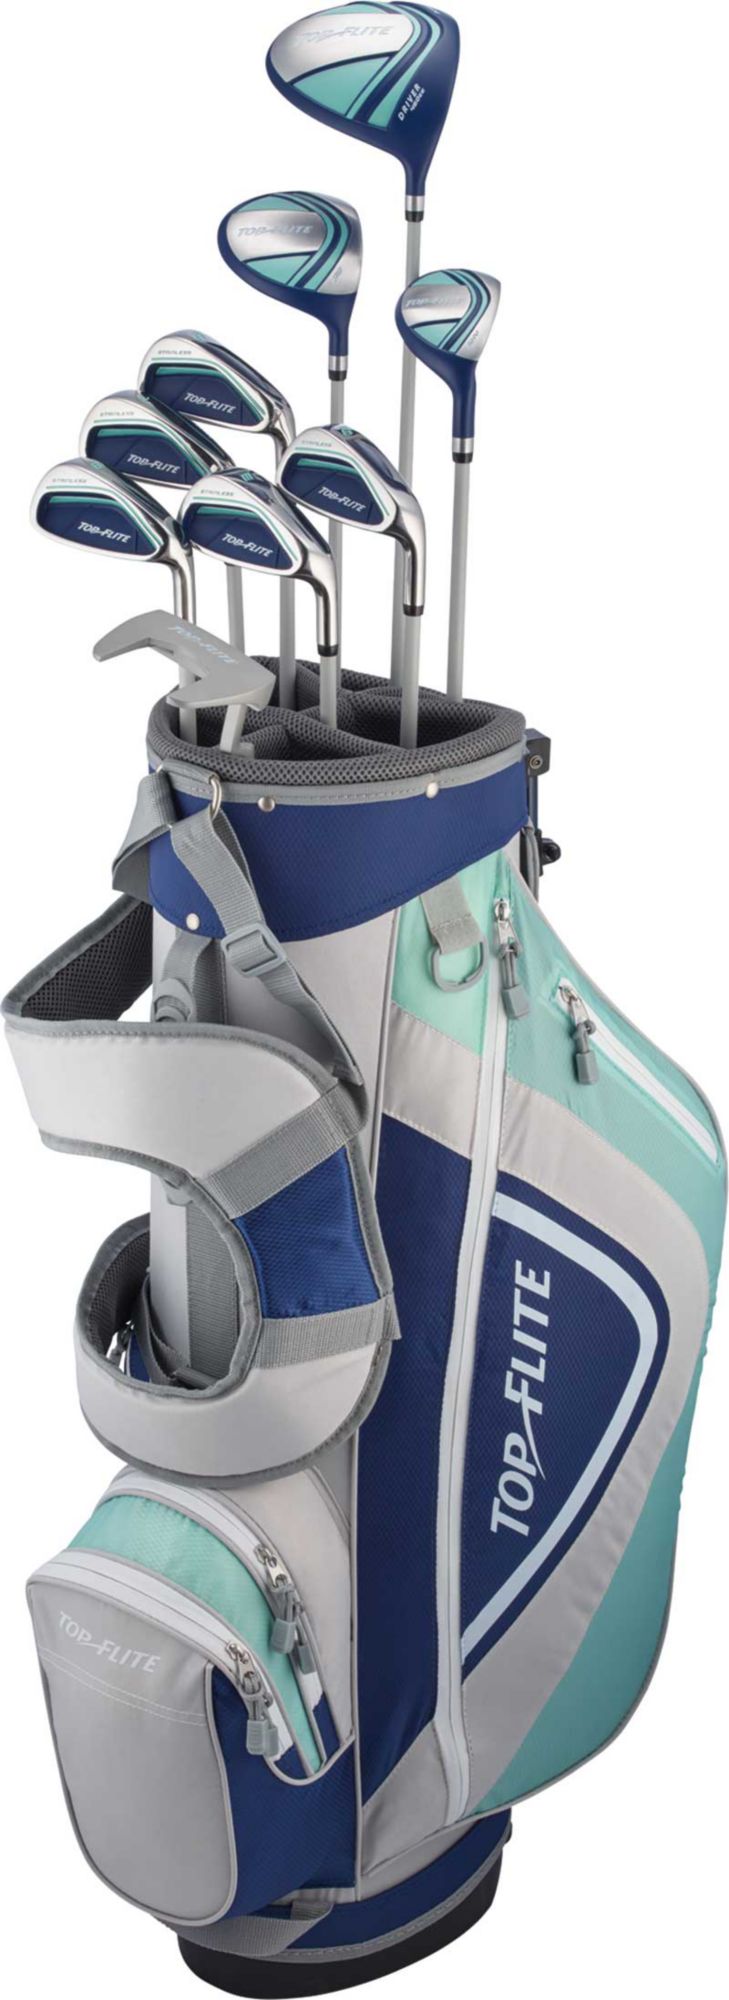 Complete Golf Clubs Sets | DICK'S Sporting Goods